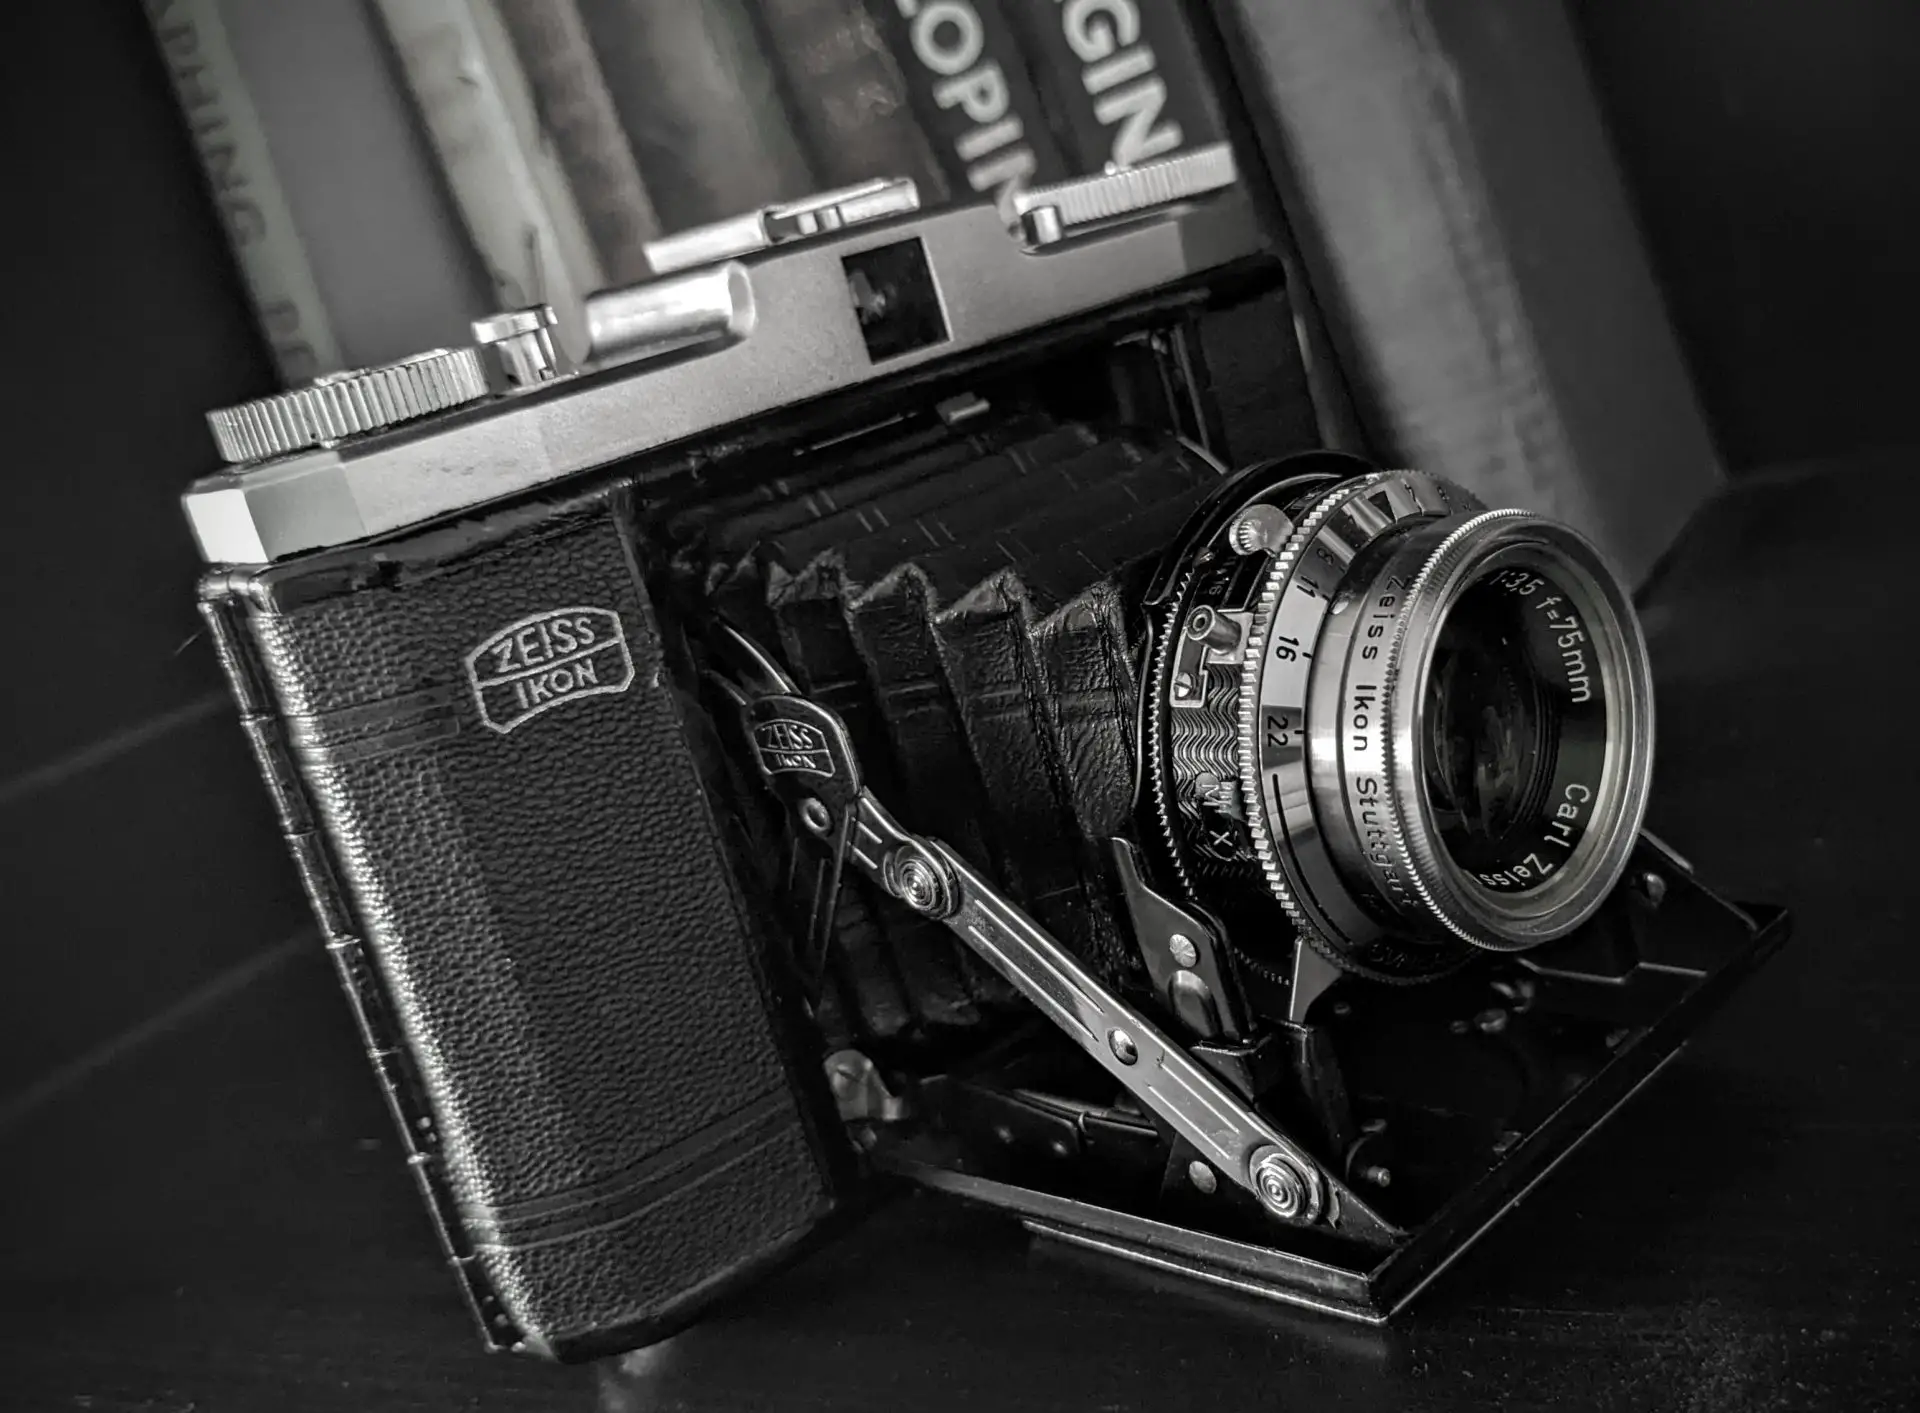 Zeiss Ikon Ikonta - Lost and Found, a 70 Year History - By Conor O